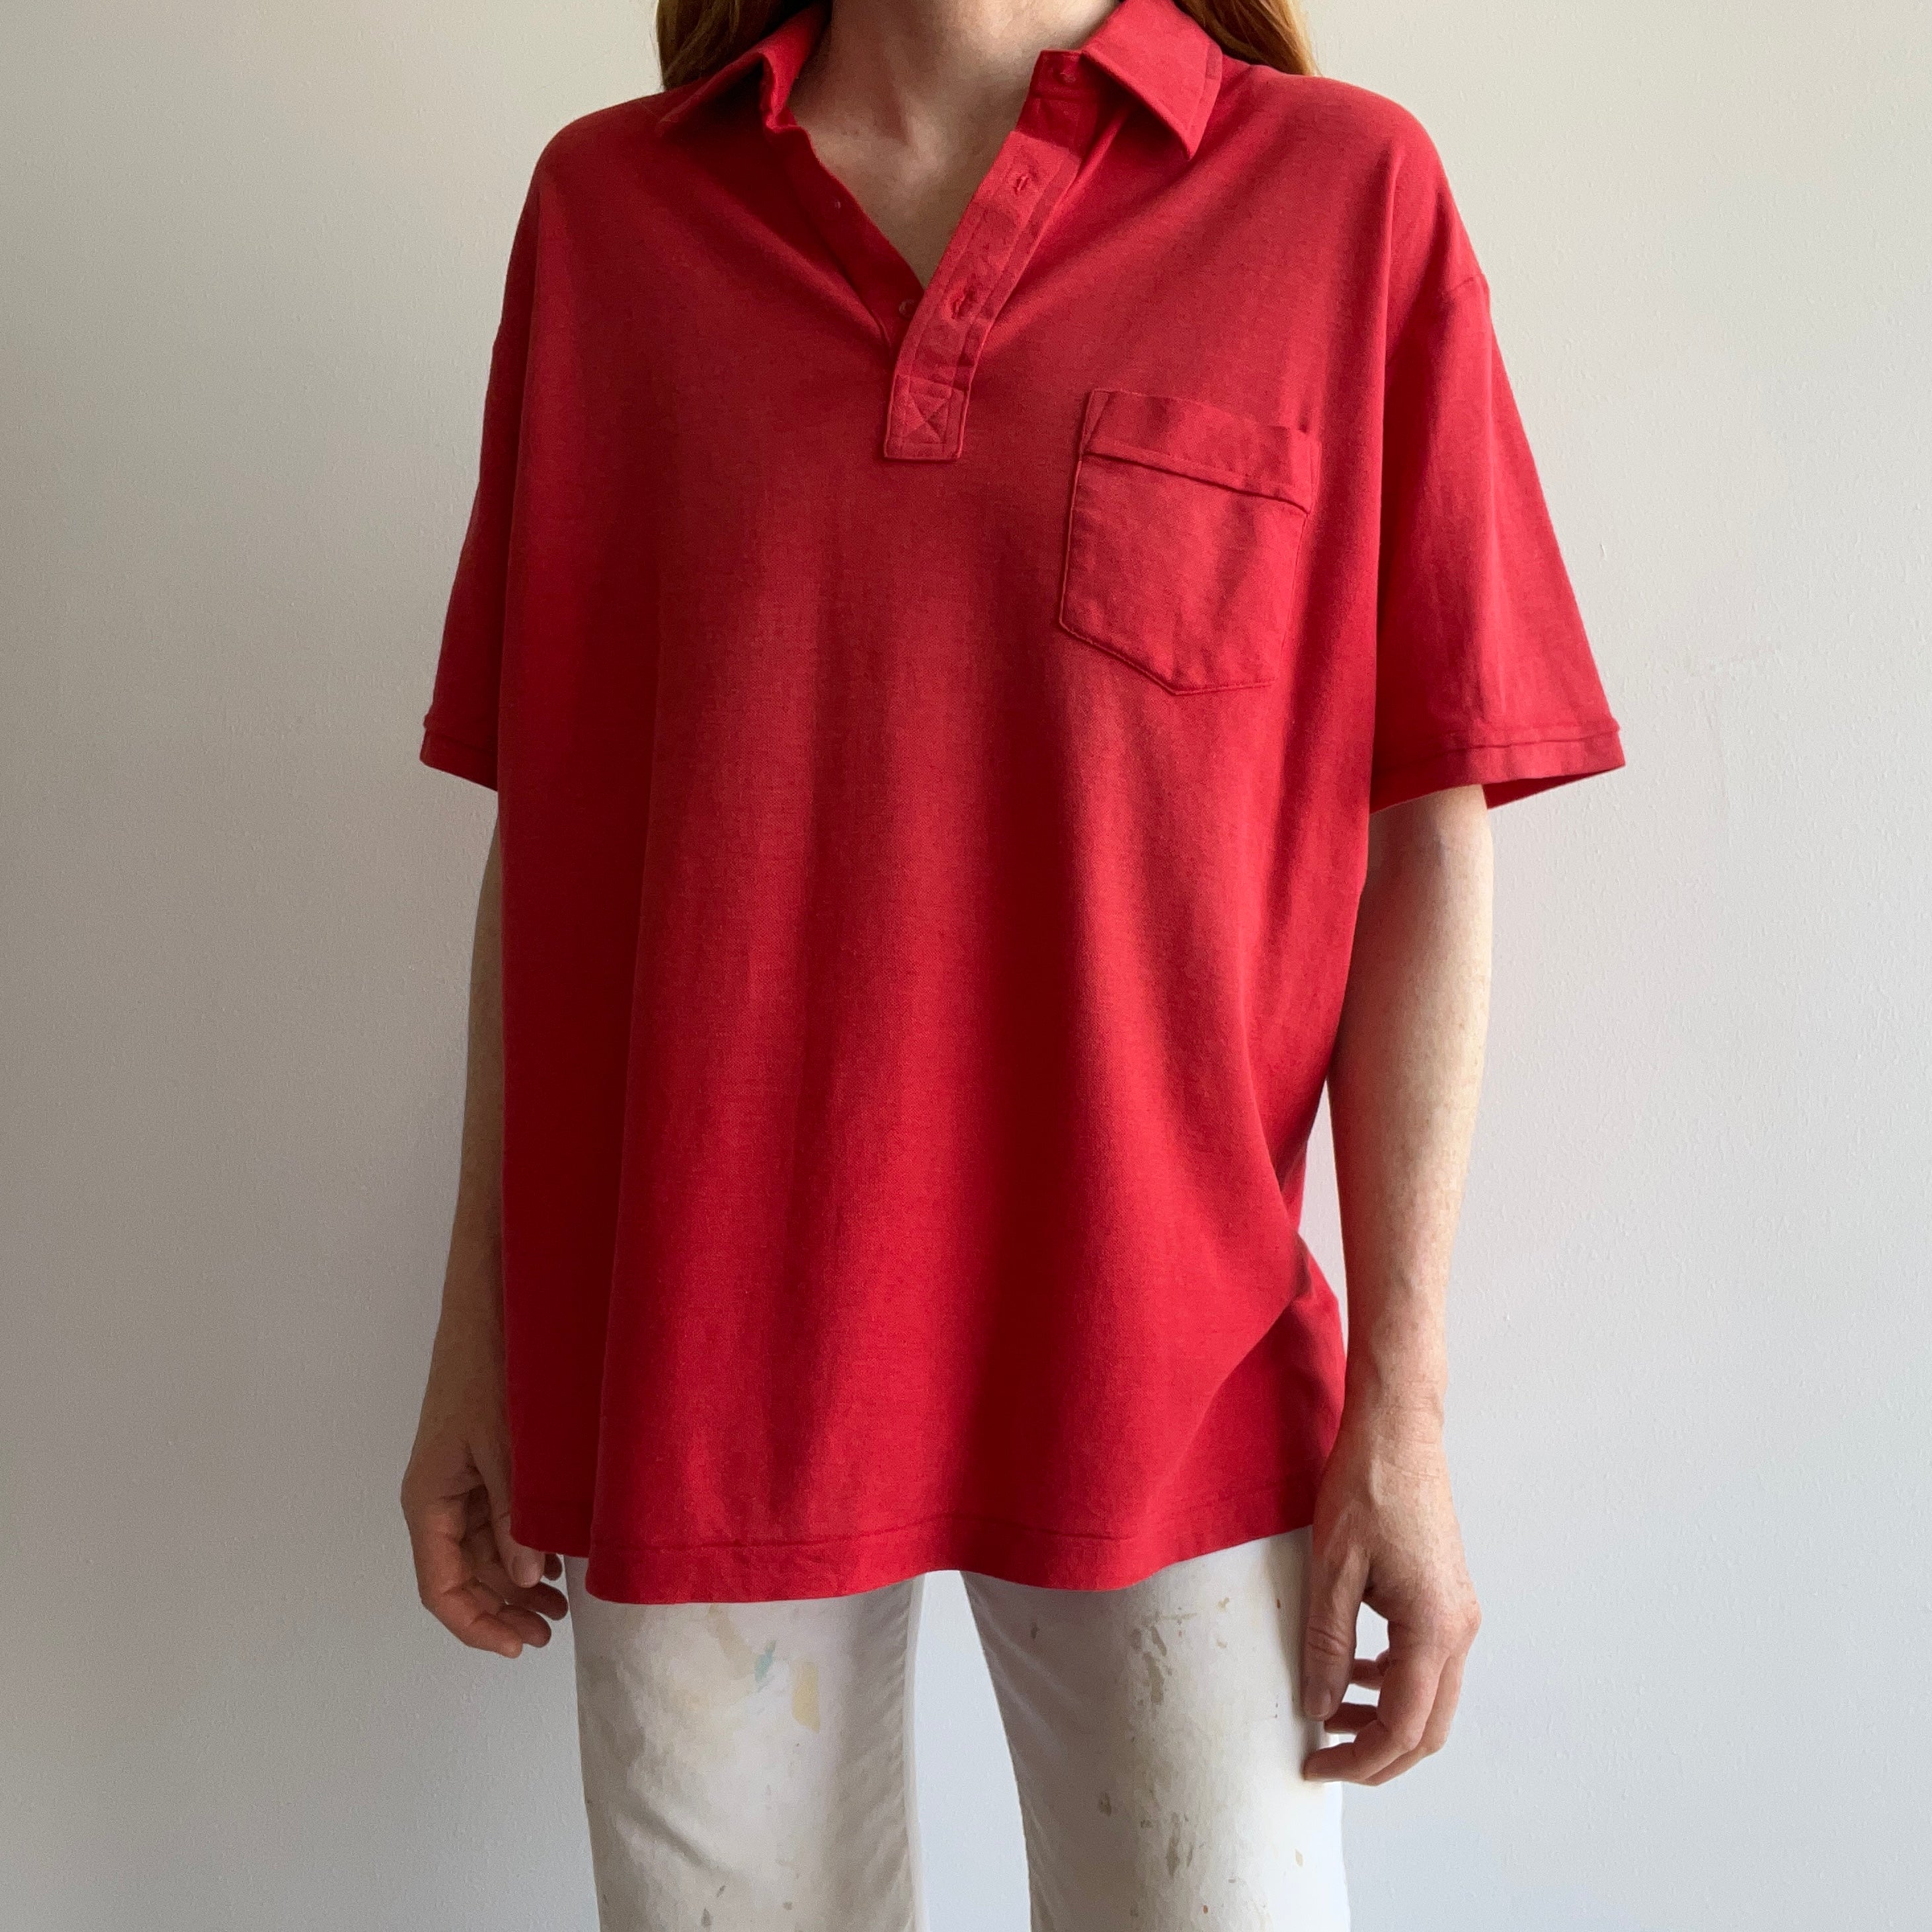 1980s Sun Faded Red Golf Polo Shirt with a Single Pocket